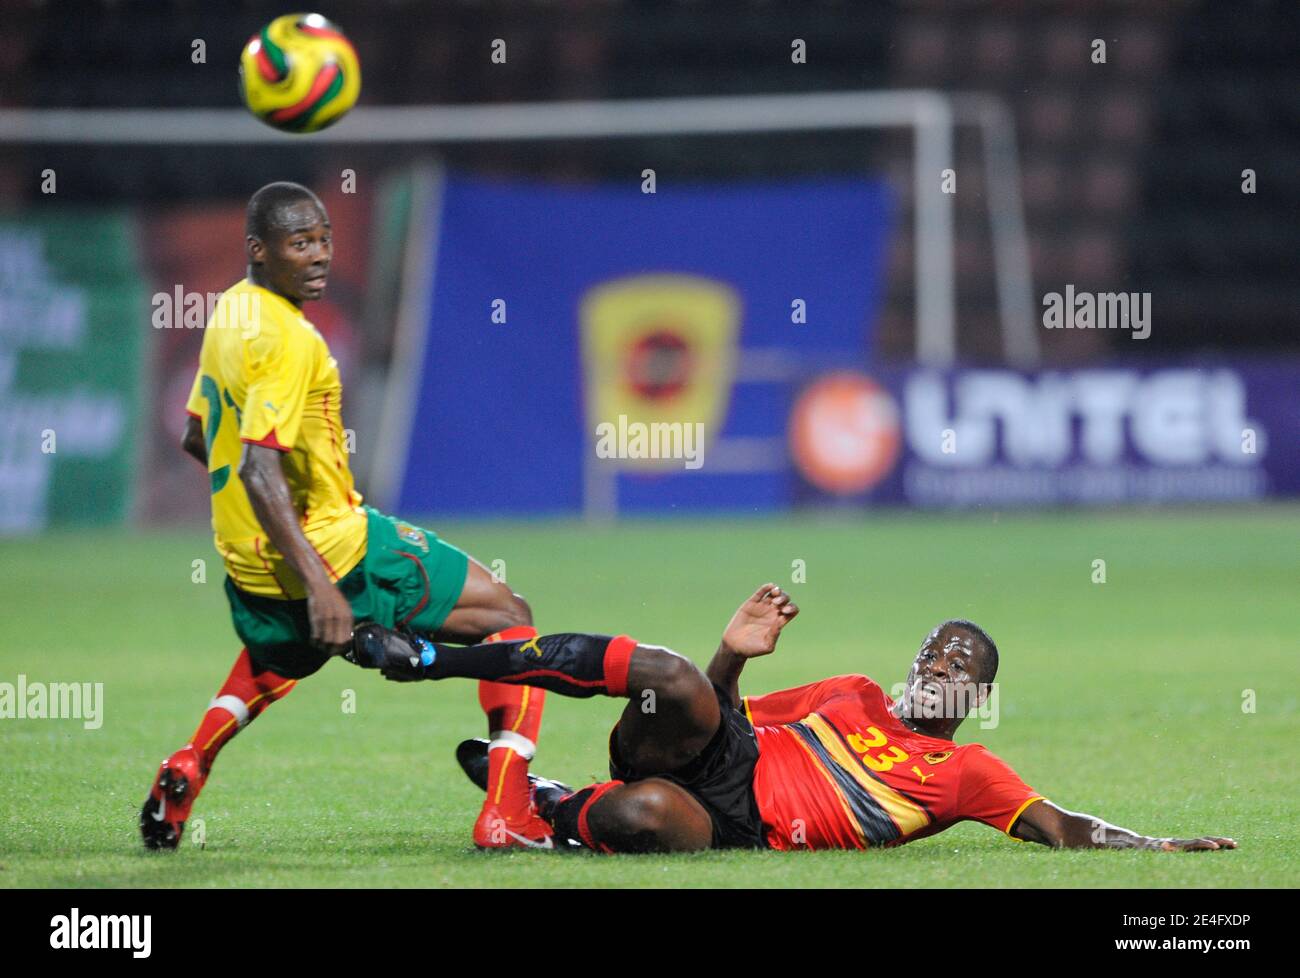 Cameroon's Enoh Eyong battles for the ball Angola's Kivuvu during a Friendly soccer Match, Cameroon vs Angola in Olhao, Portugal on October 14, 2009. The match ended in a 1-1 draw. Photo by Henri Szwarc/ABACAPRESS.COM Stock Photo